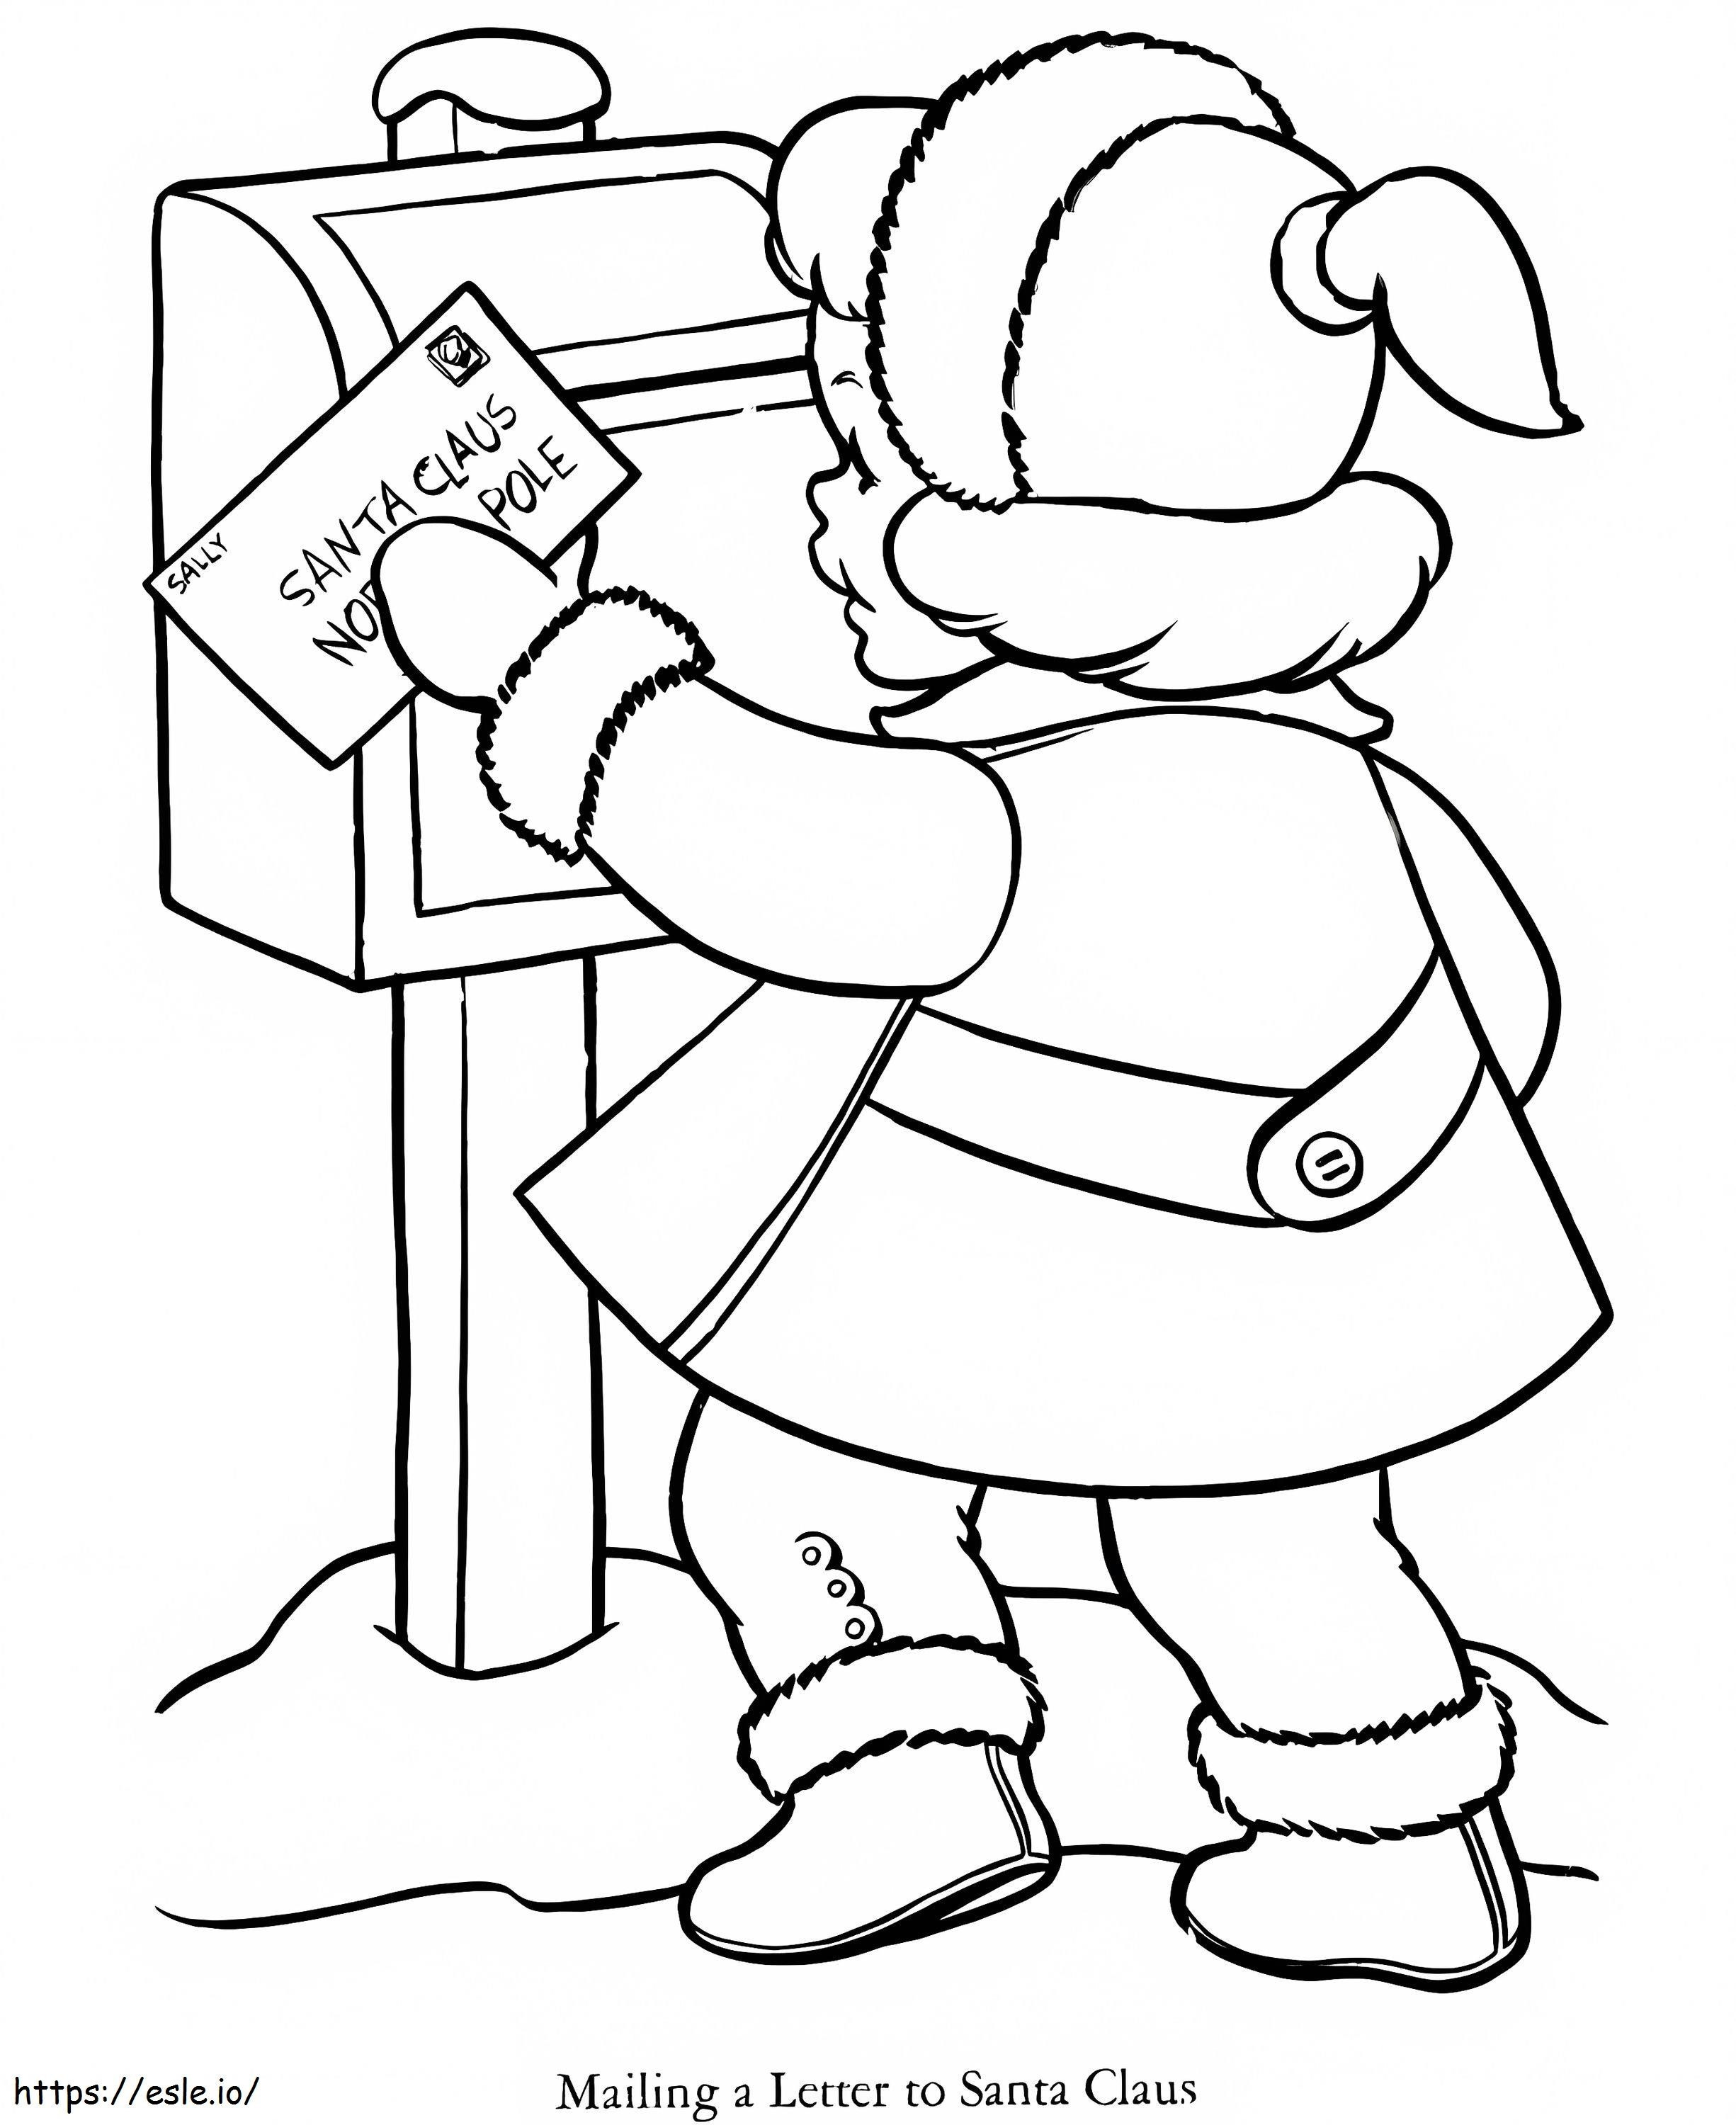 Mailing A Letter To Santa Claus coloring page